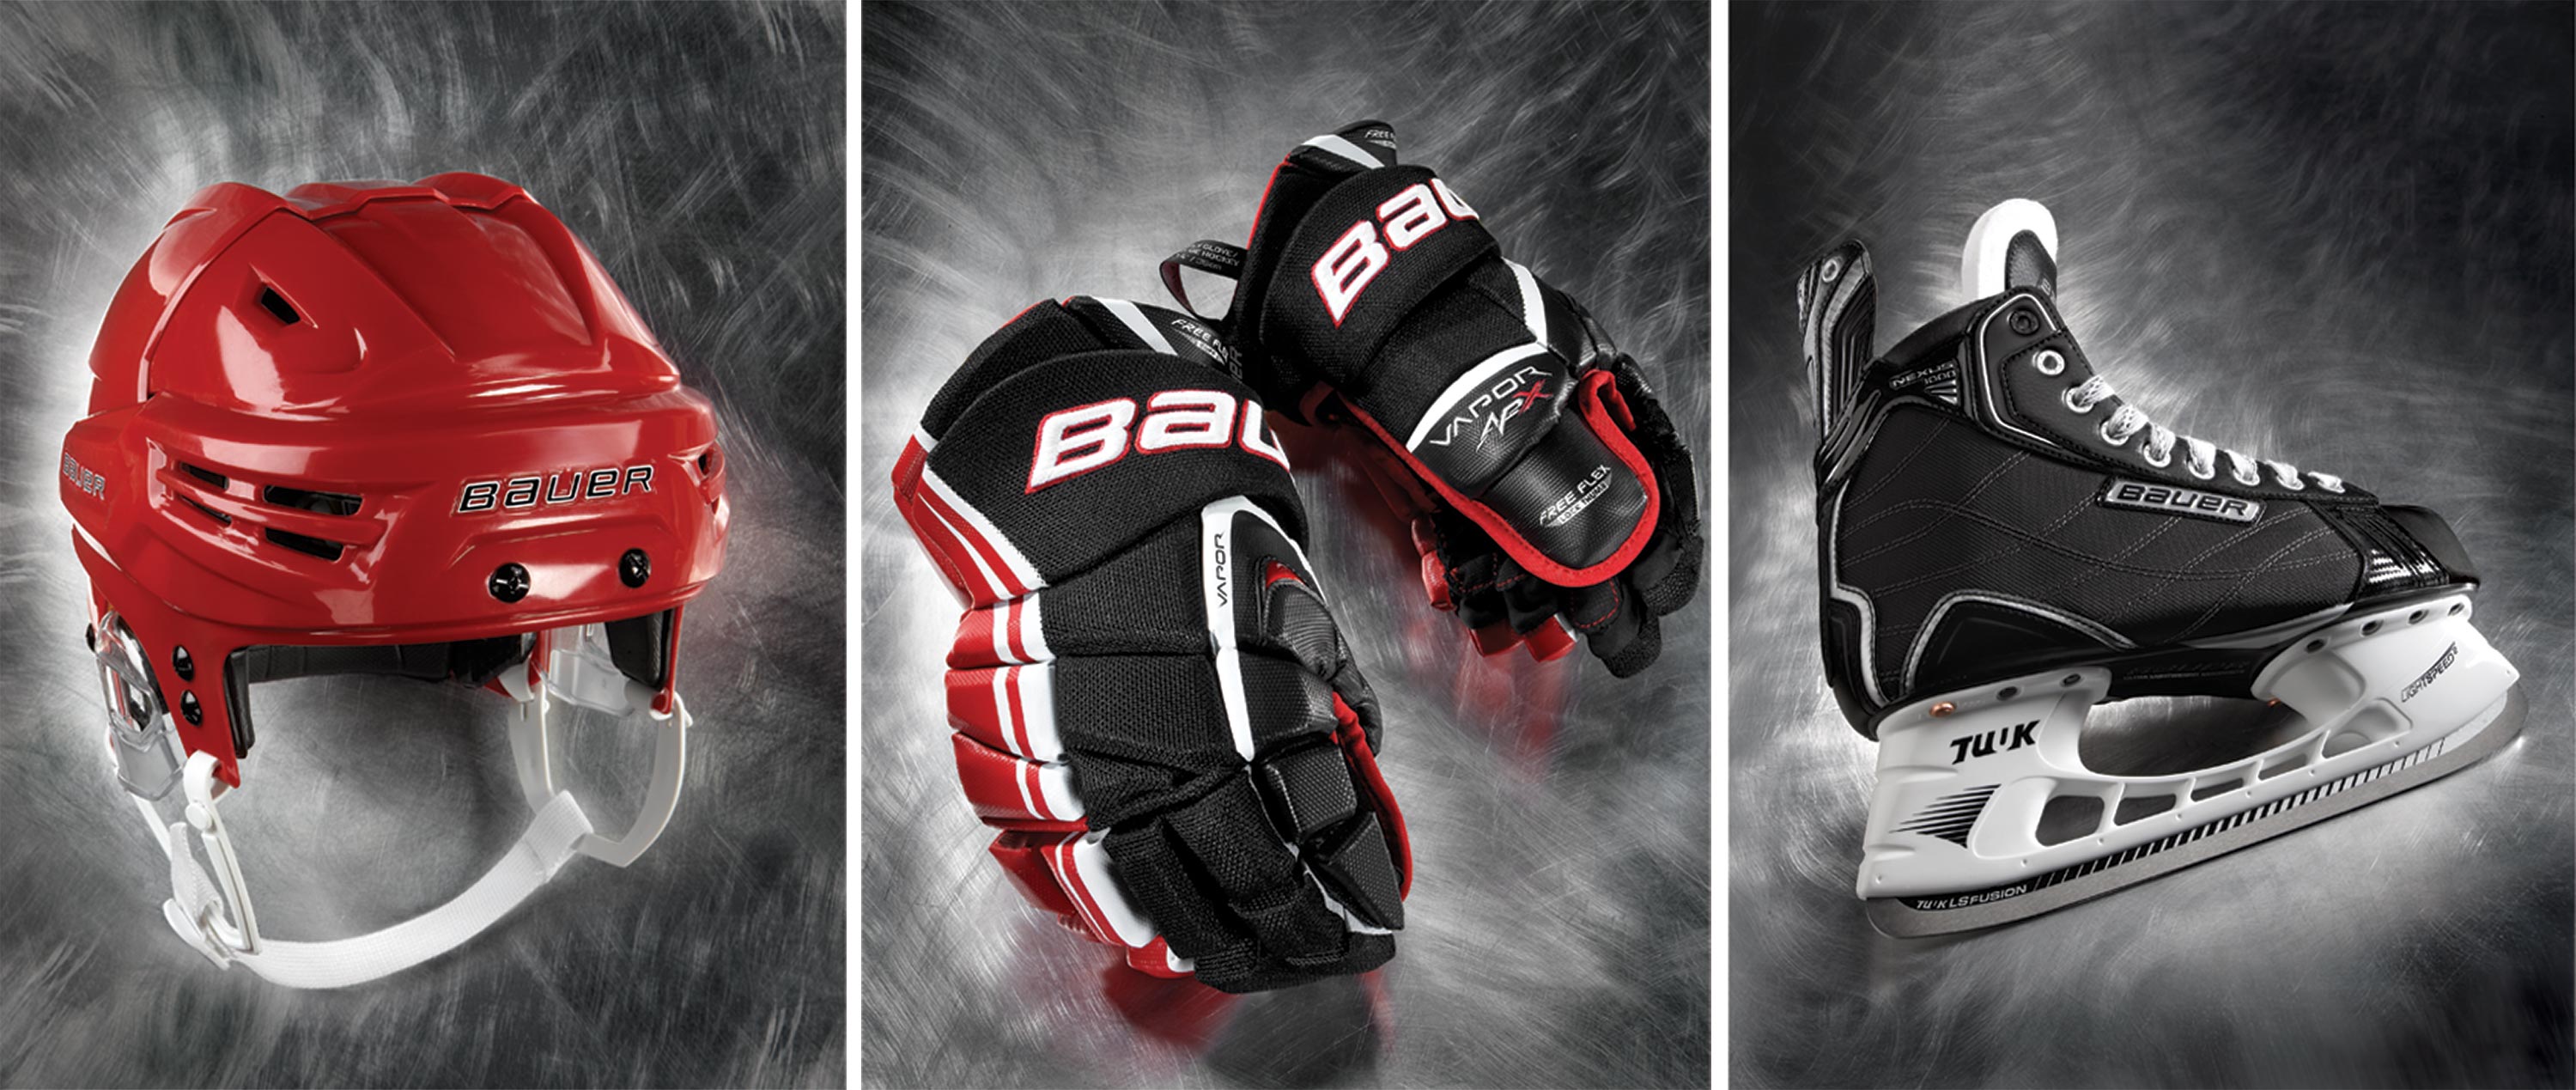 creative photography for bauer hockey products using a brushed metal surface